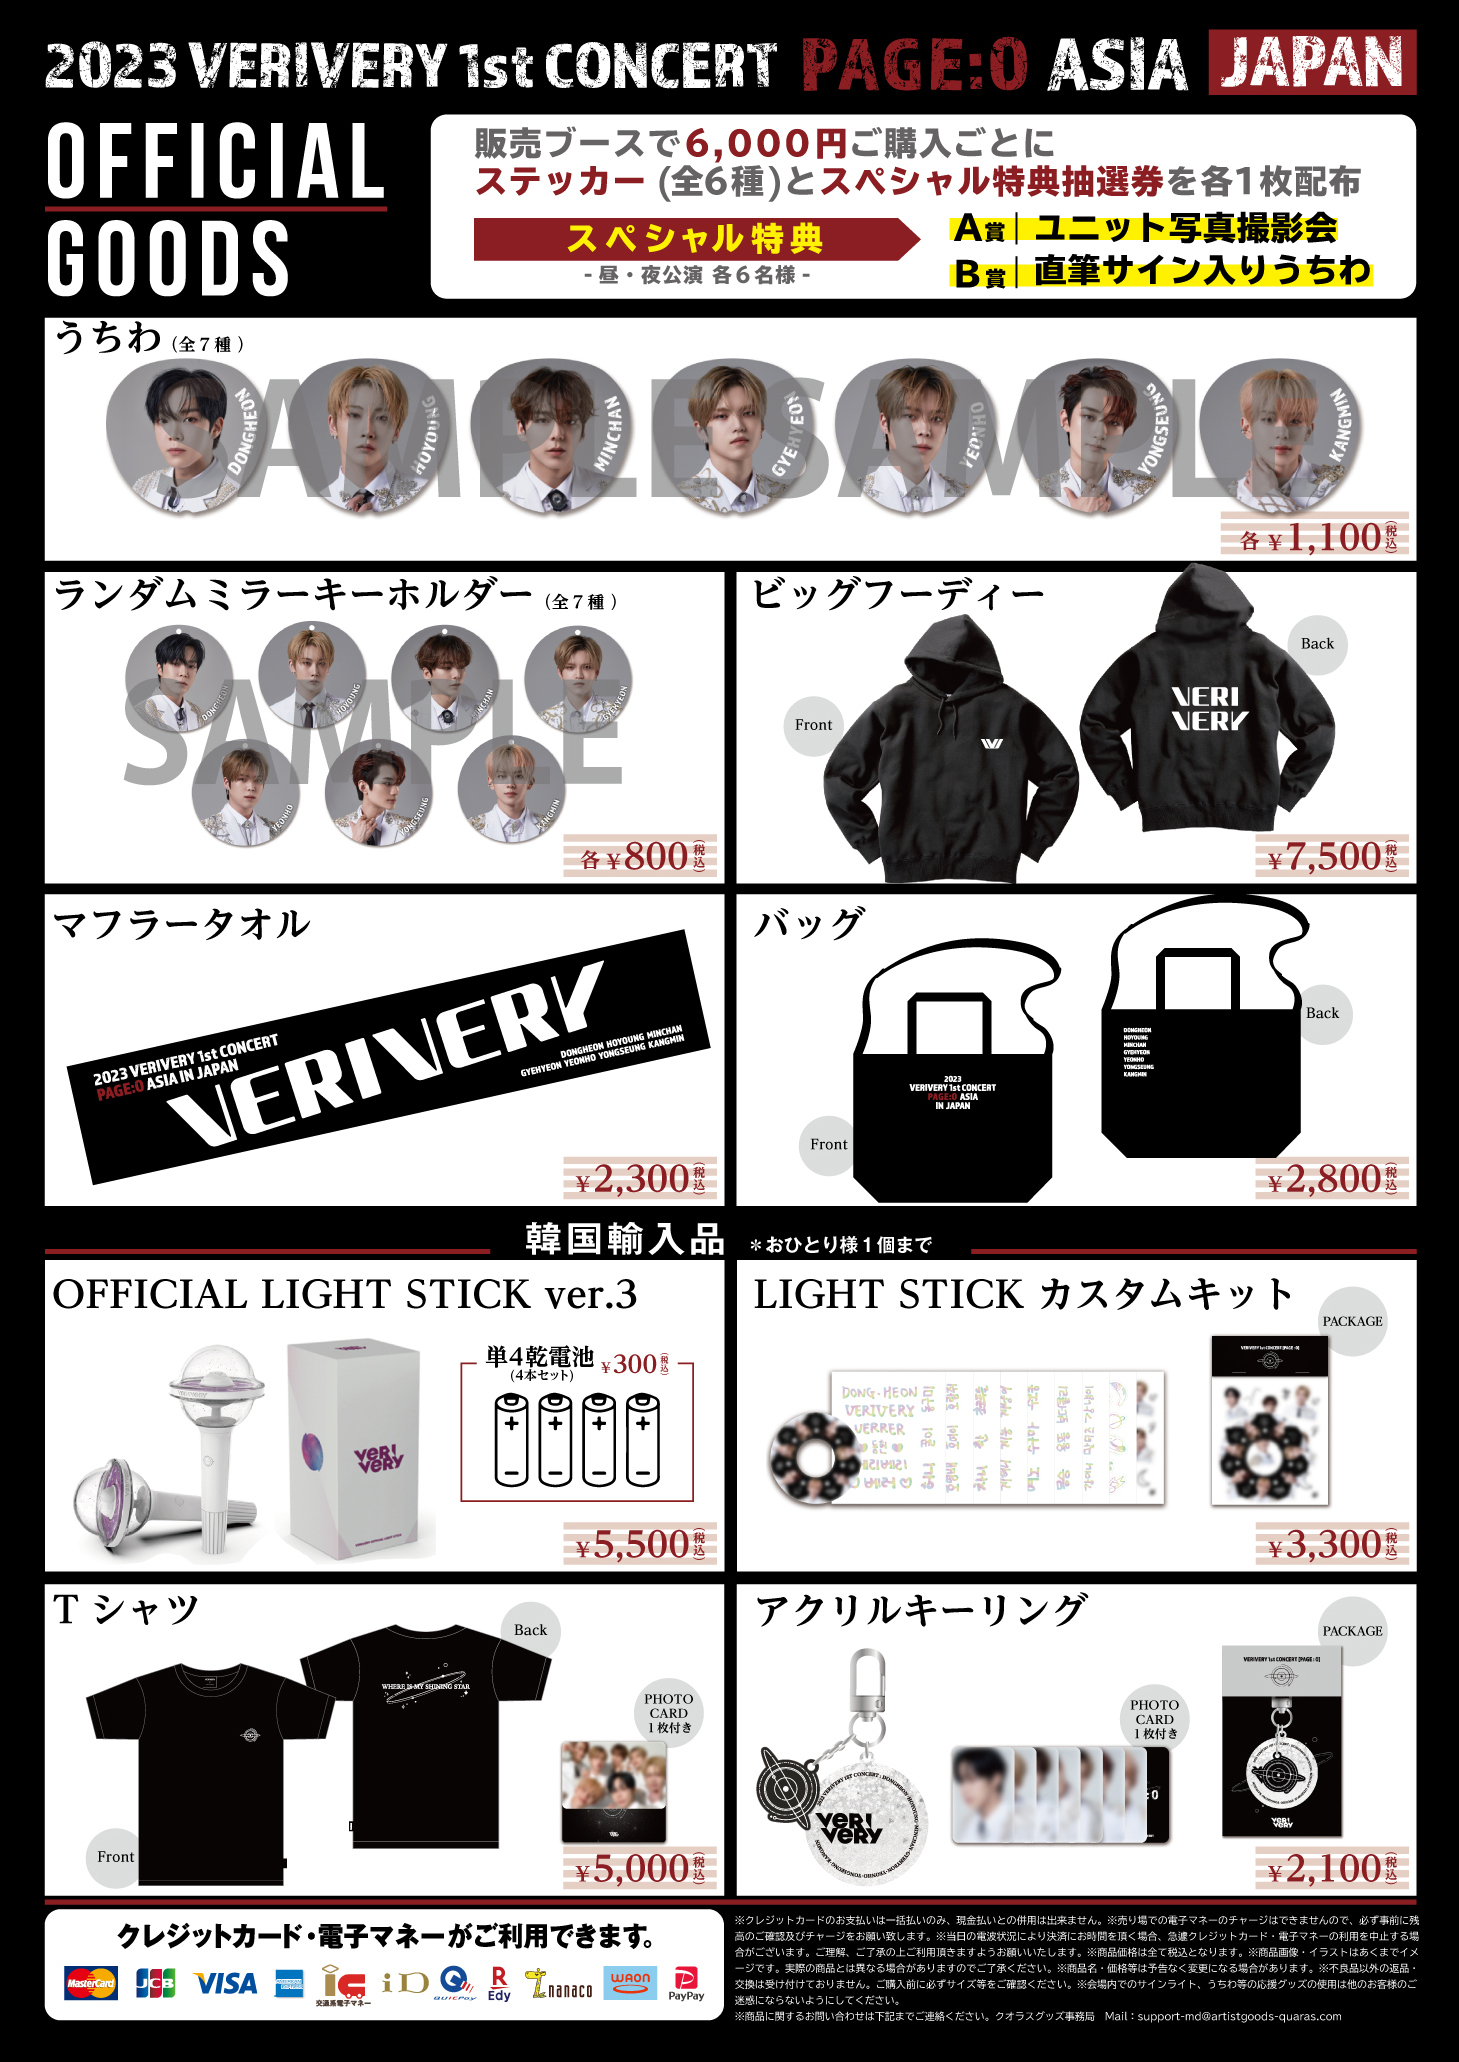 2023 VERIVERY 1st CONCERT PAGE : O ASIA IN JAPAN」オフィシャル